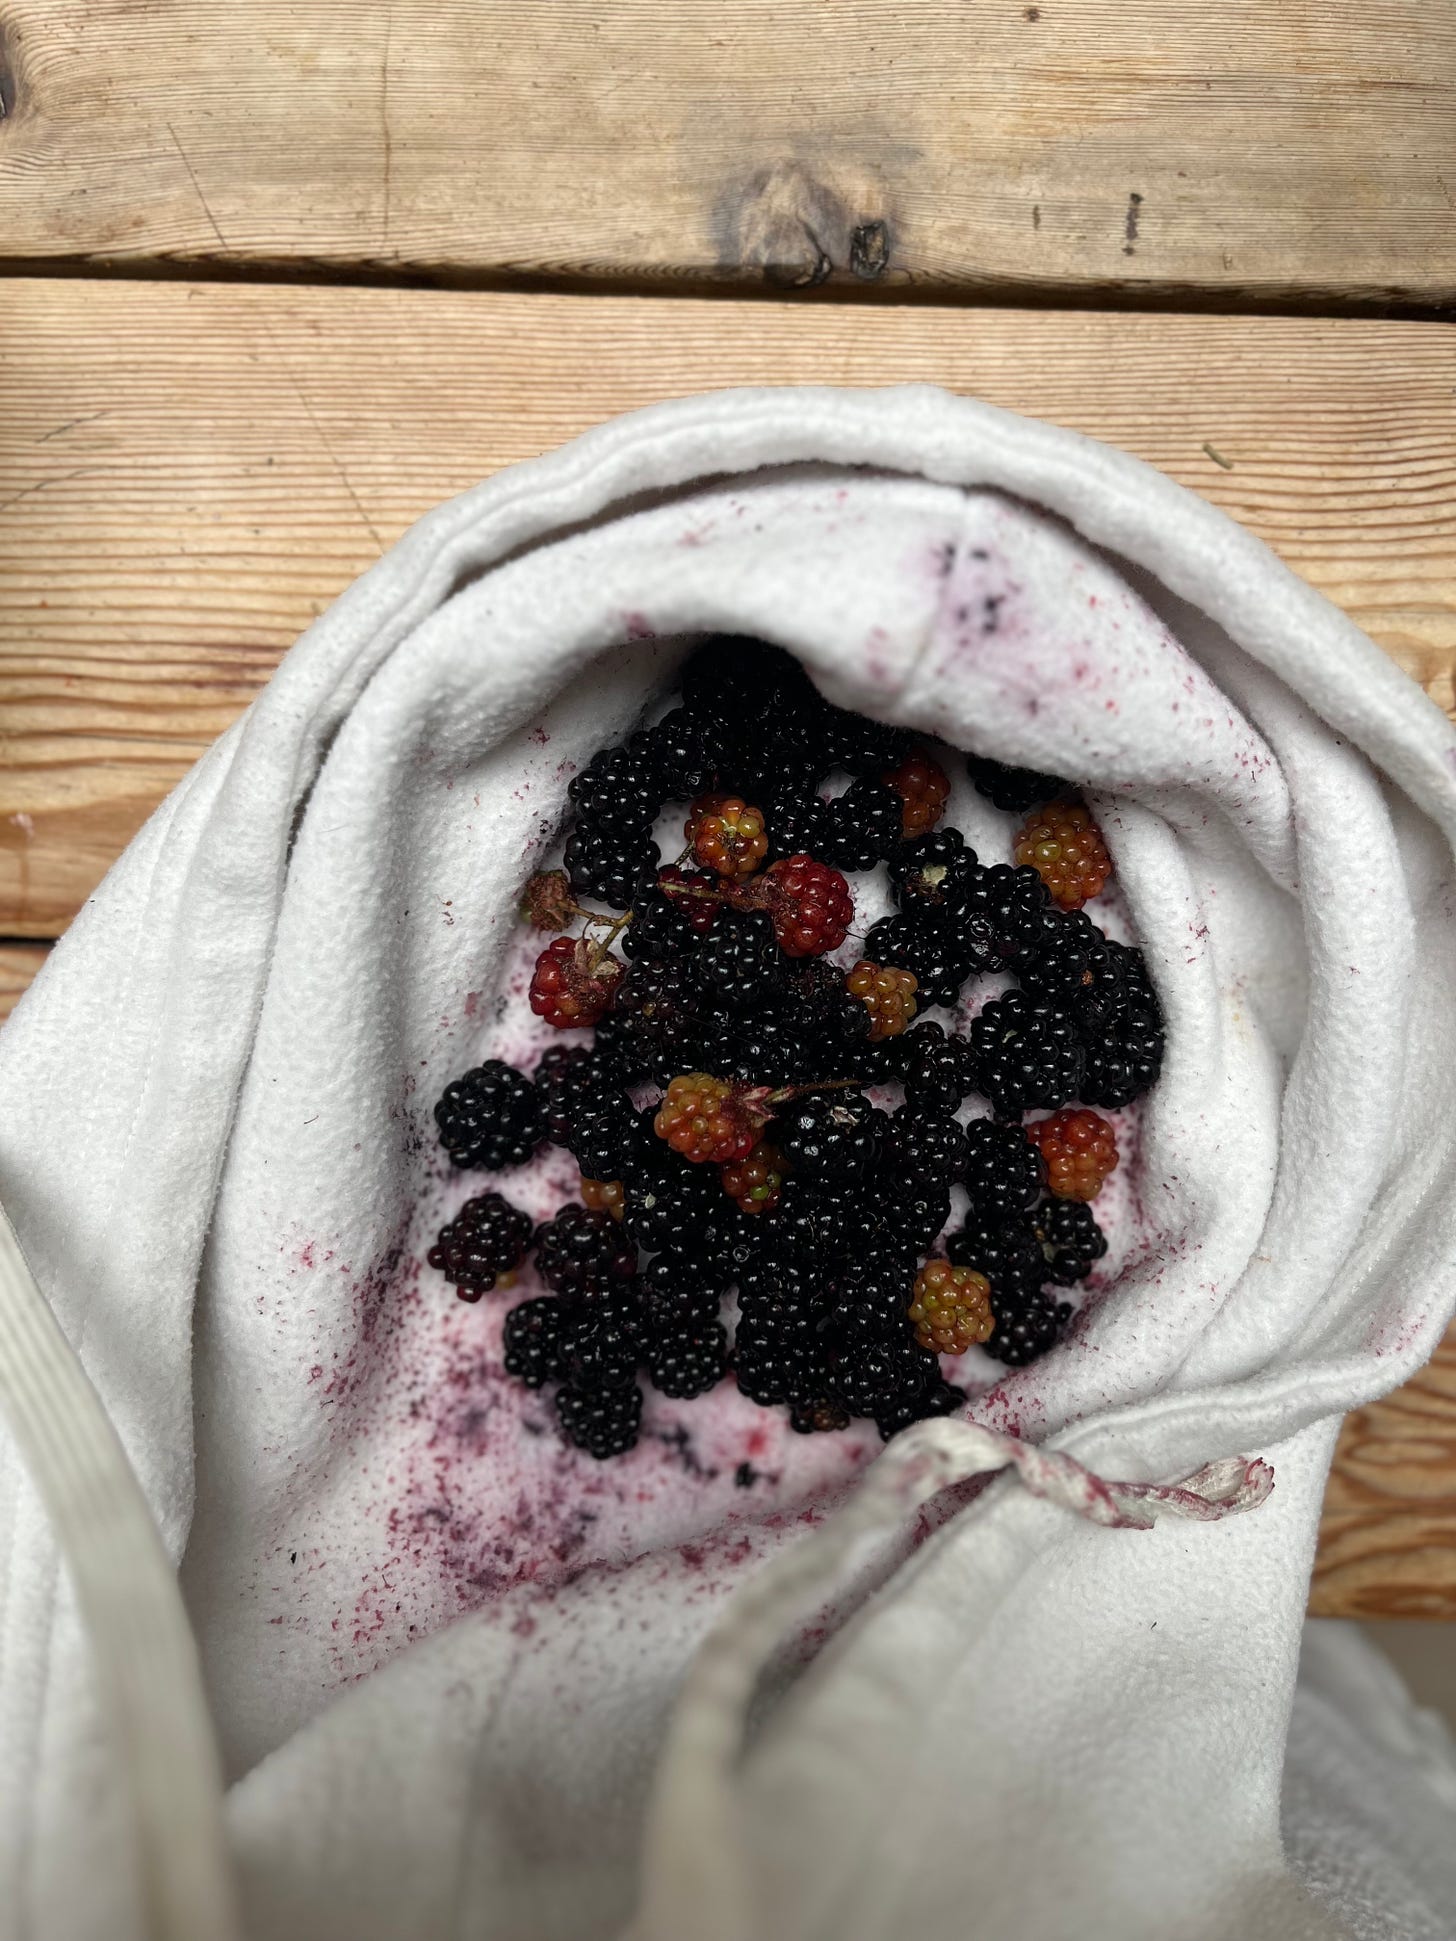 A close-up of a section of Amber's white sweatshirt on a table. The hood part of the hoodie is filled with fresh berries, staining the material.